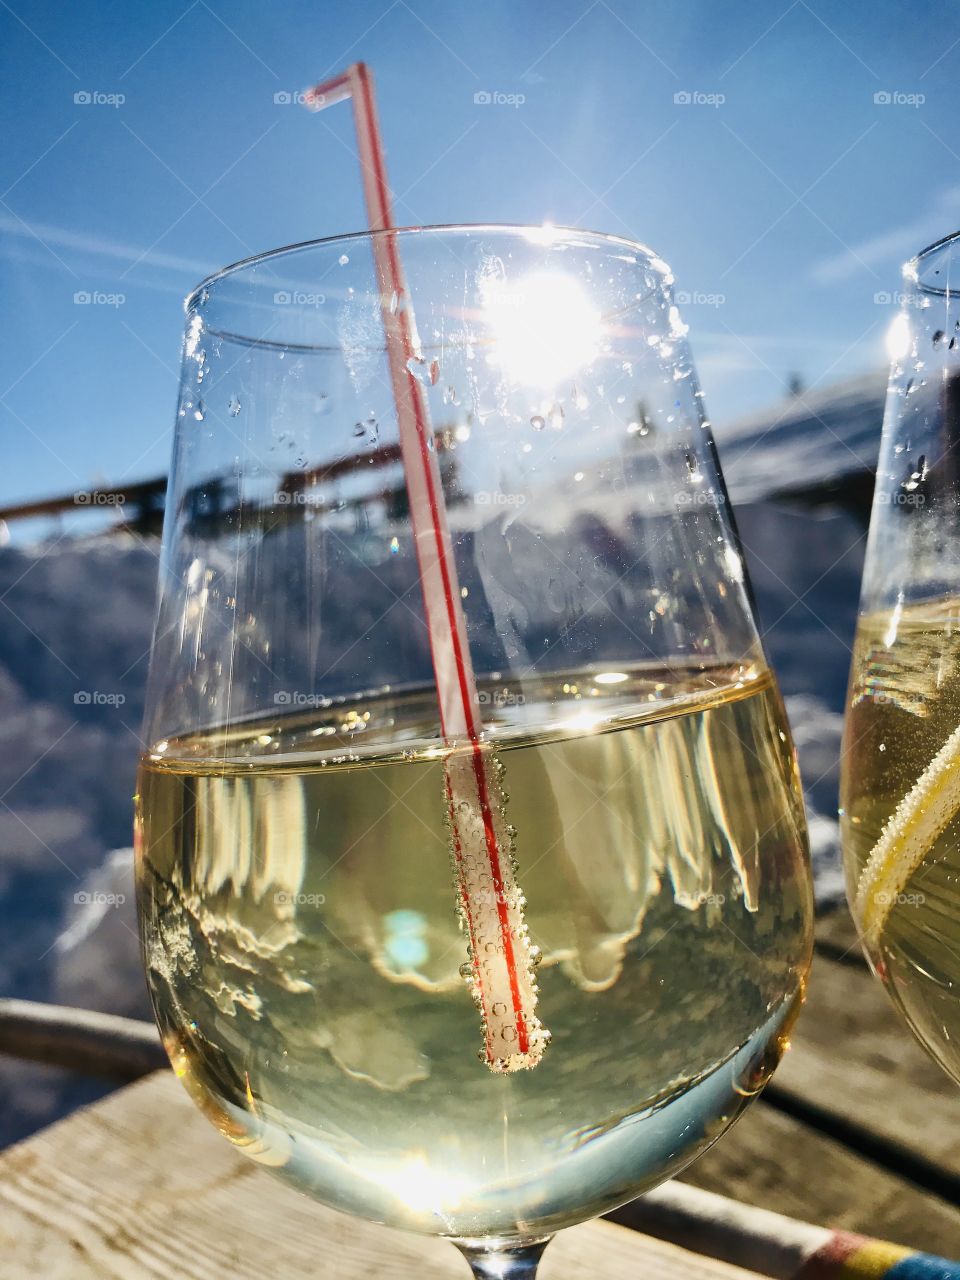 Have a nice Glas of wine after skiing on top of a mountain - cheers!